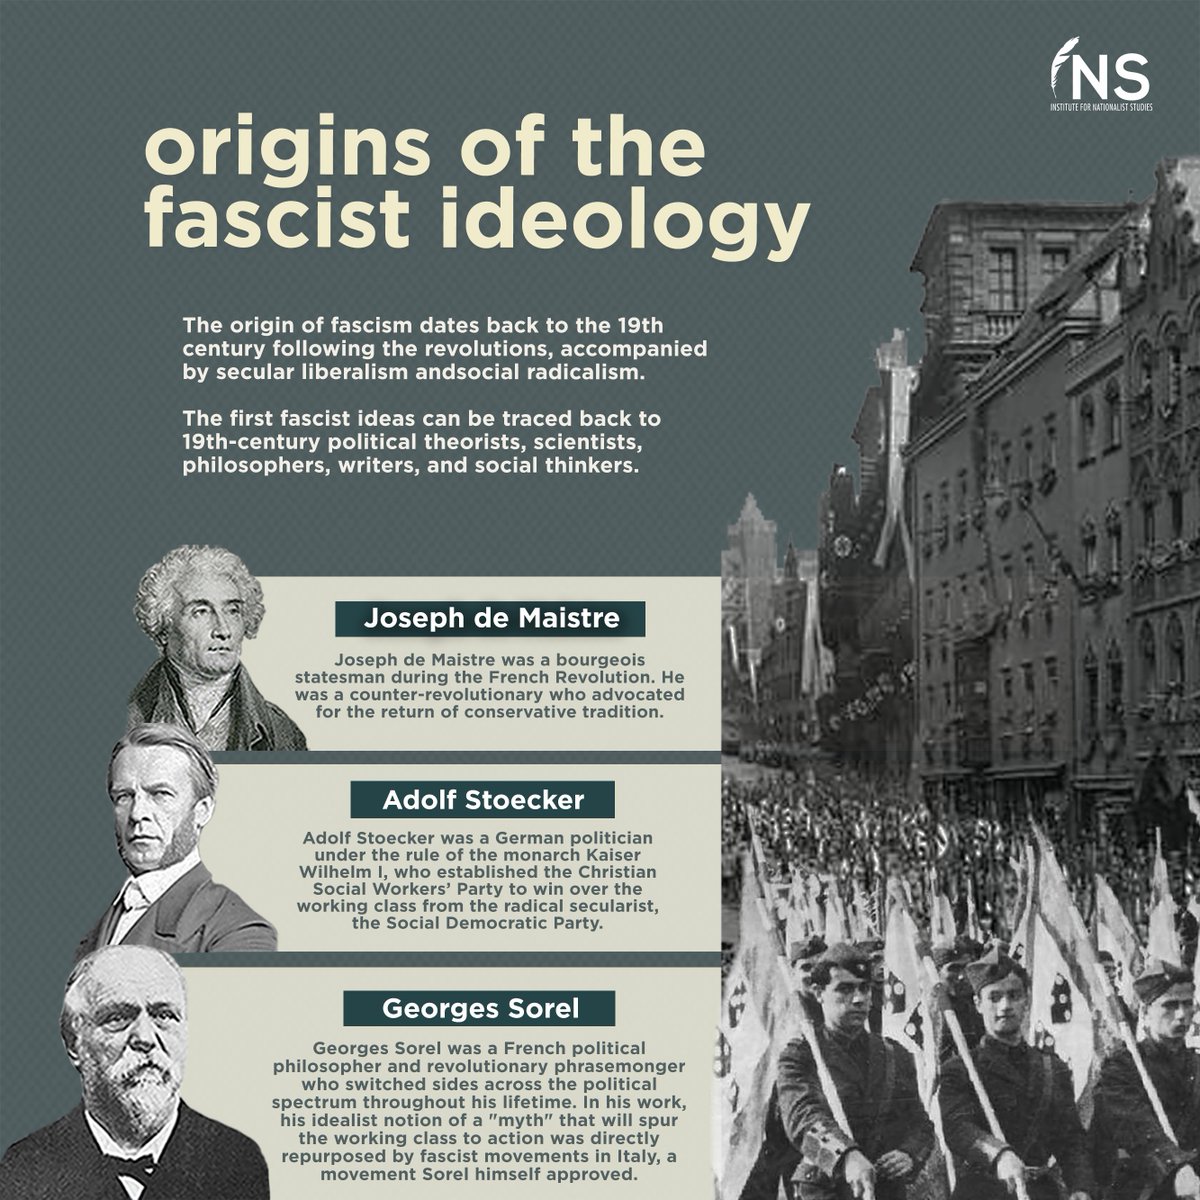 [THREAD]Apparently, nowadays, many of us indiscriminately use the word "fascism" to describe a political action that promotes a dictatorial regime. Underneath these brutalities is a system that is exclusionary and monolithic. But what really is fascism?(1/2)